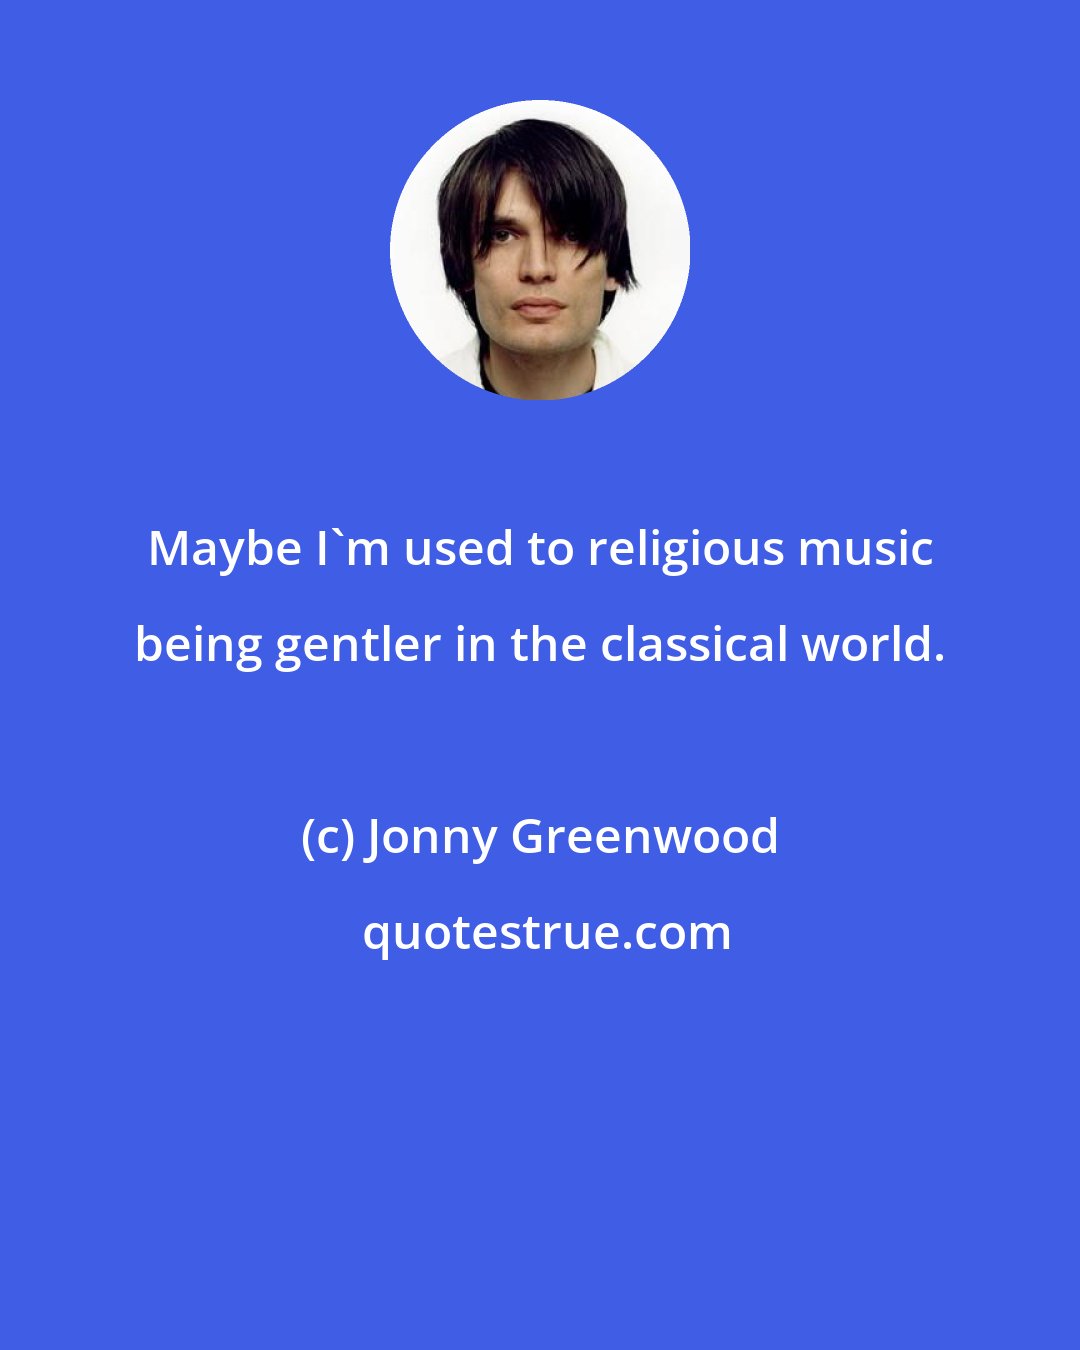 Jonny Greenwood: Maybe I'm used to religious music being gentler in the classical world.